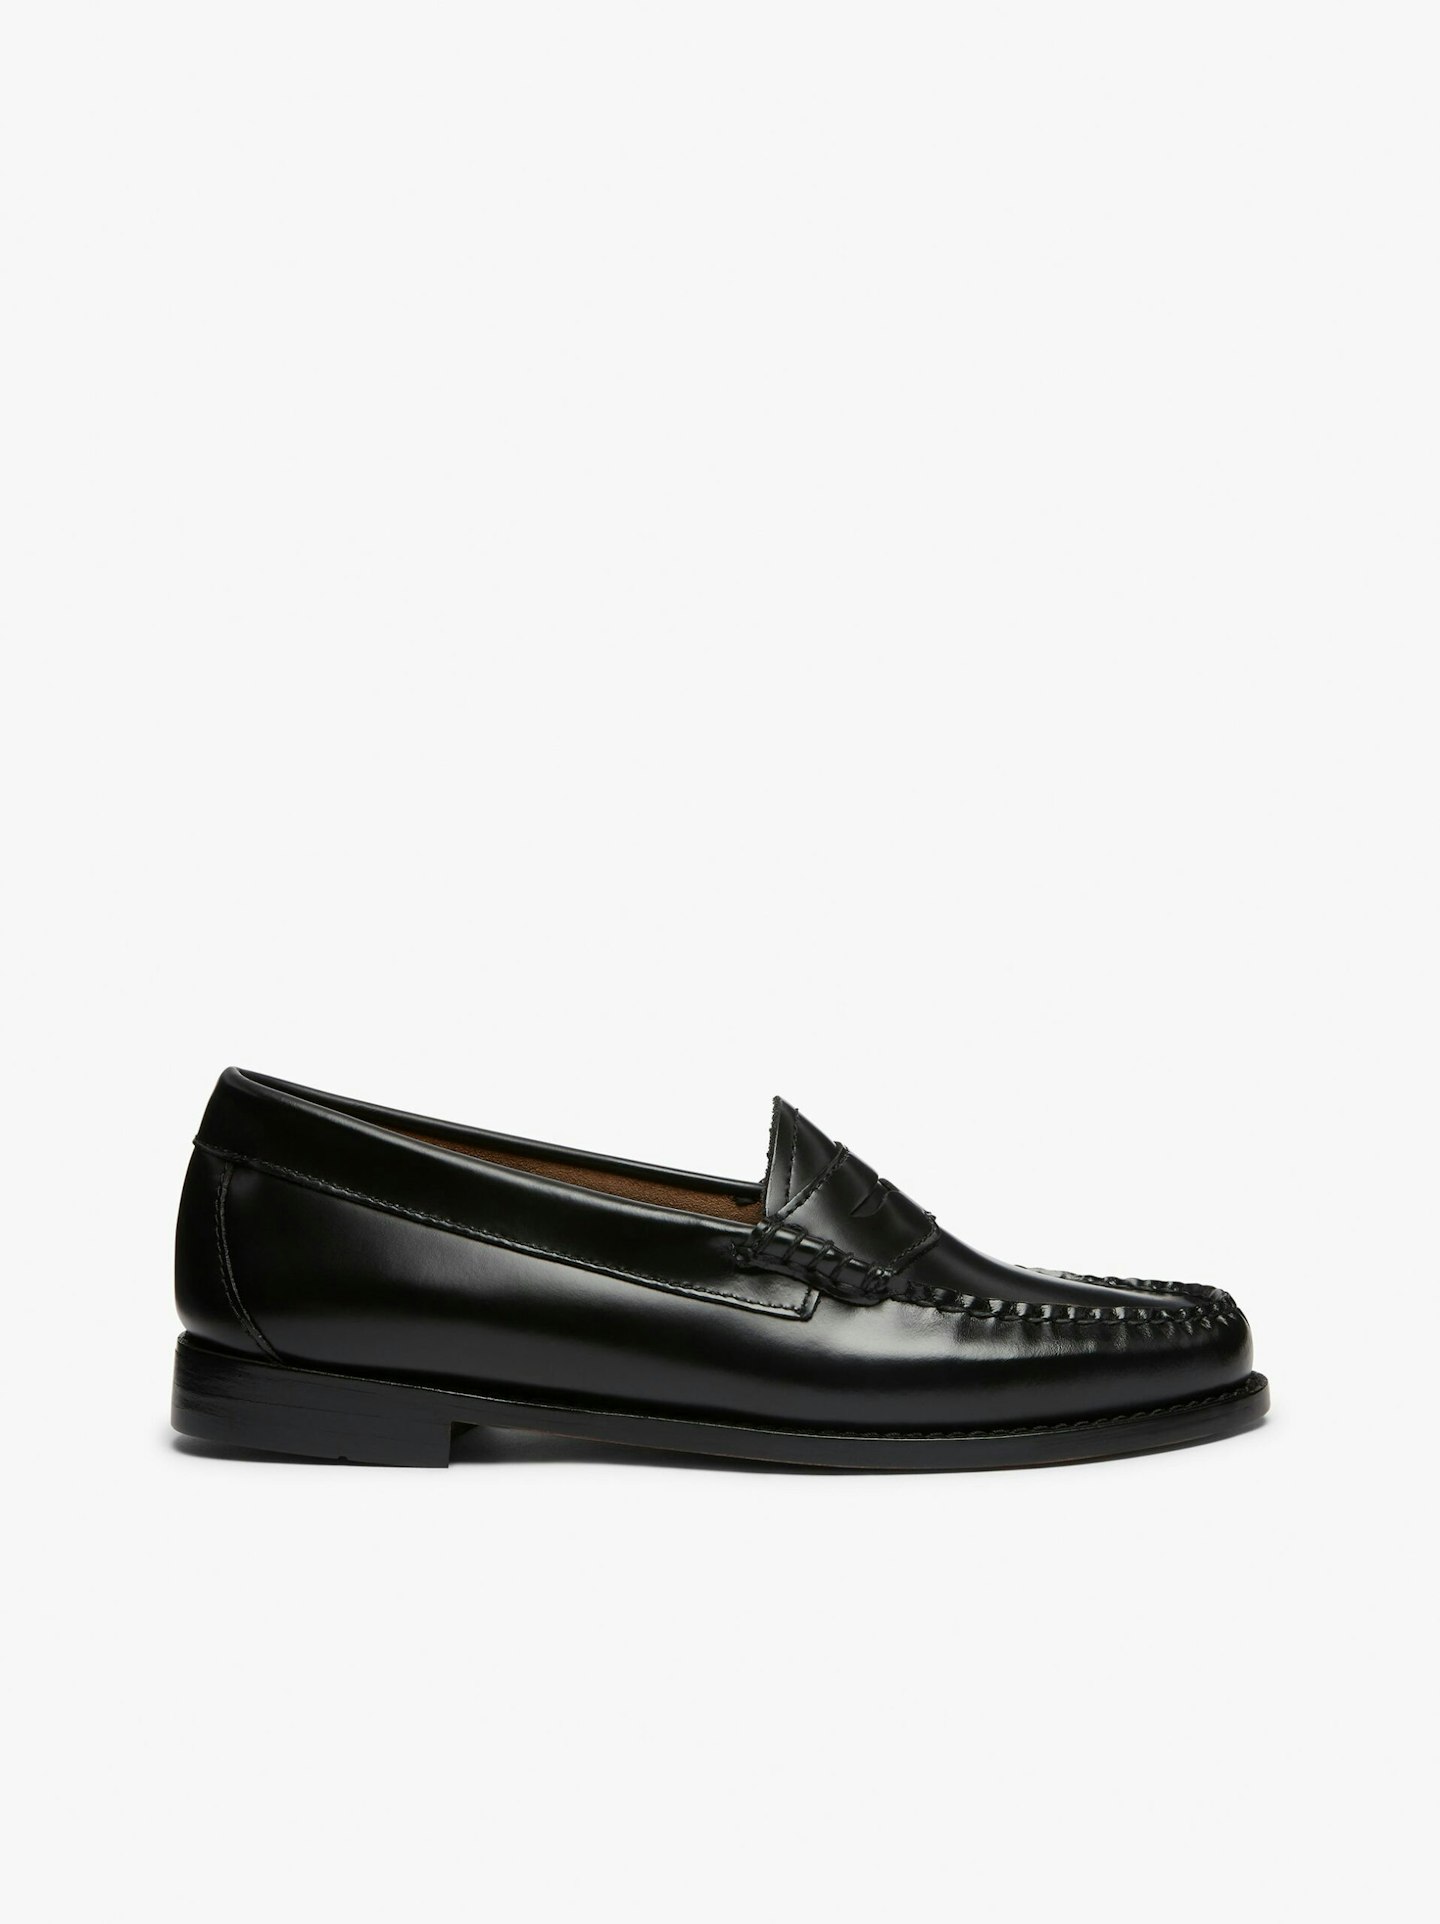 GH Bass & Co, Weejuns Penny Loafers Black Leather